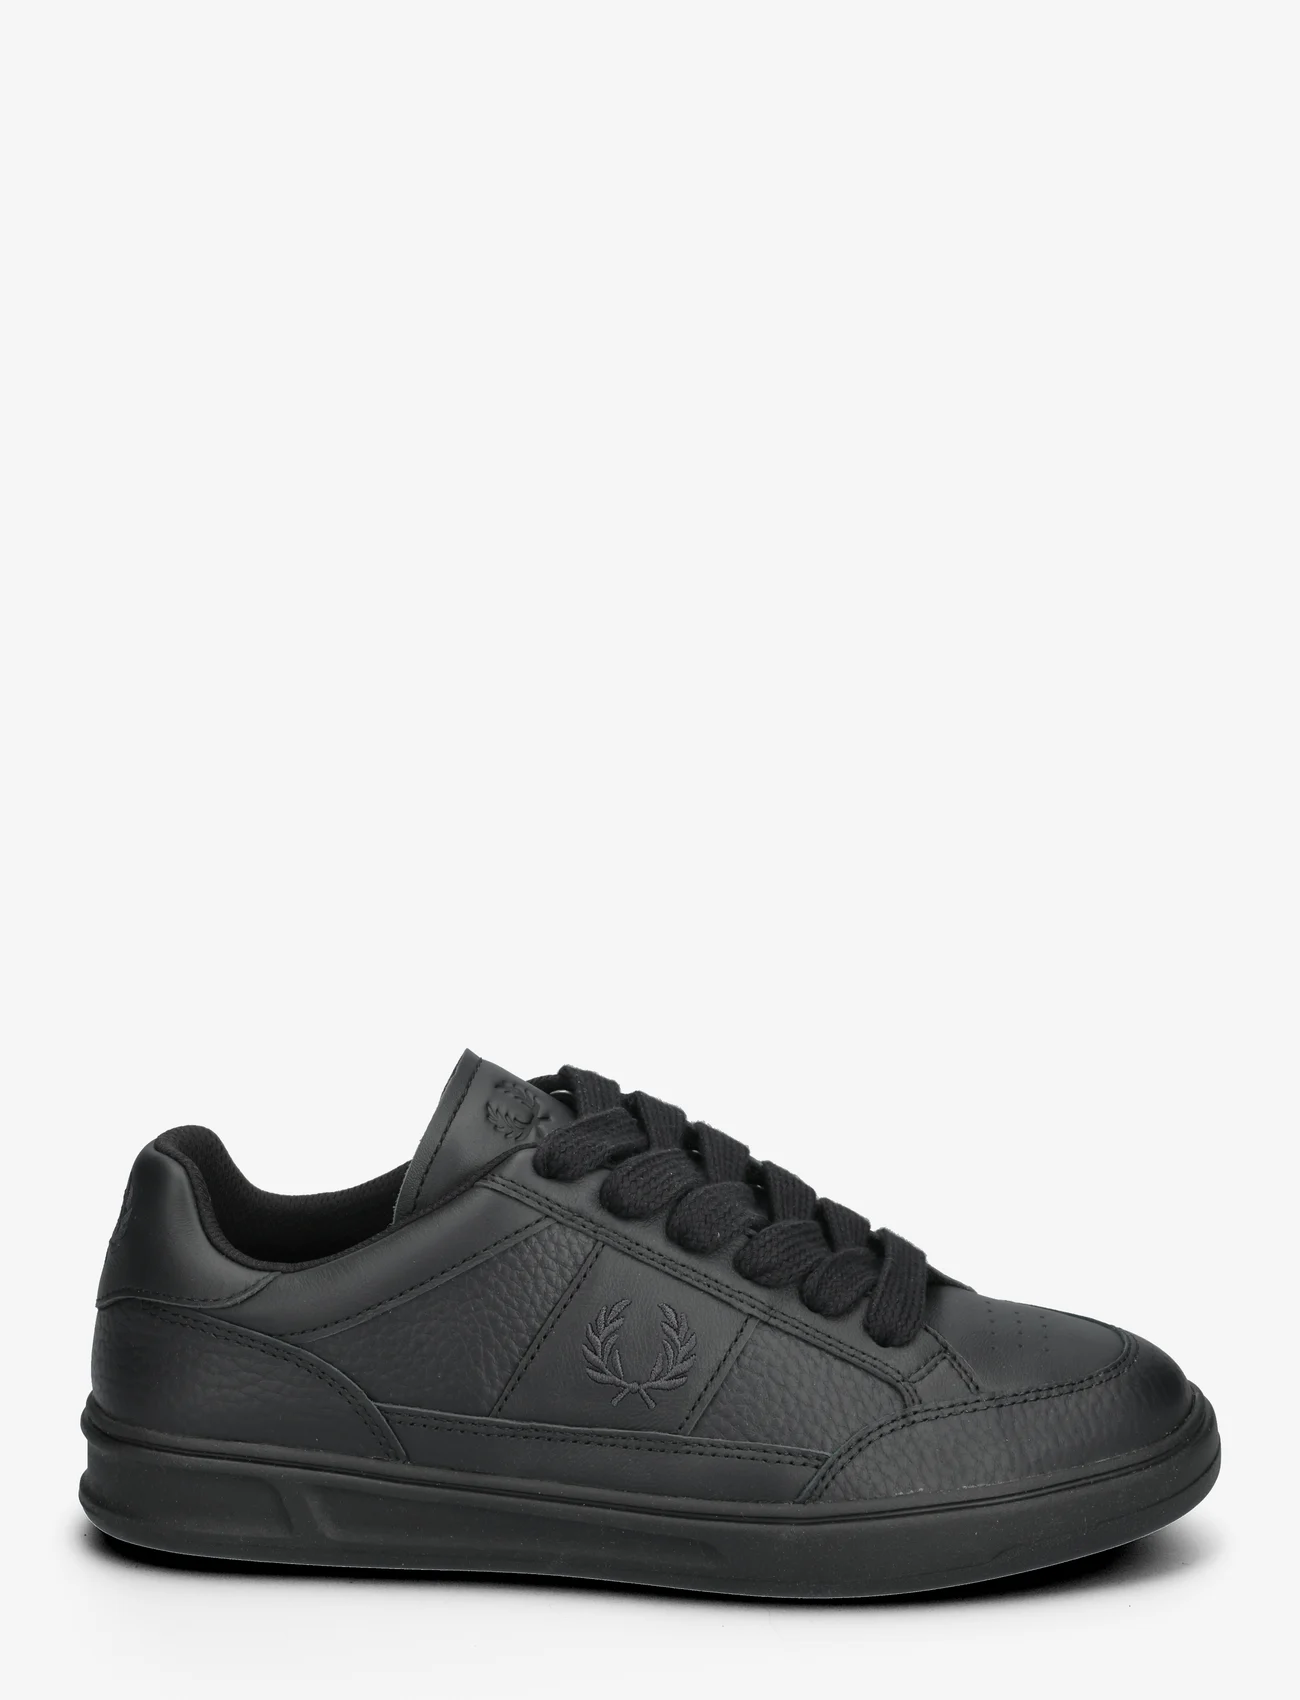 Fred Perry - B440 TEXTURED LEATHER - låga sneakers - black/anchorgrey - 1